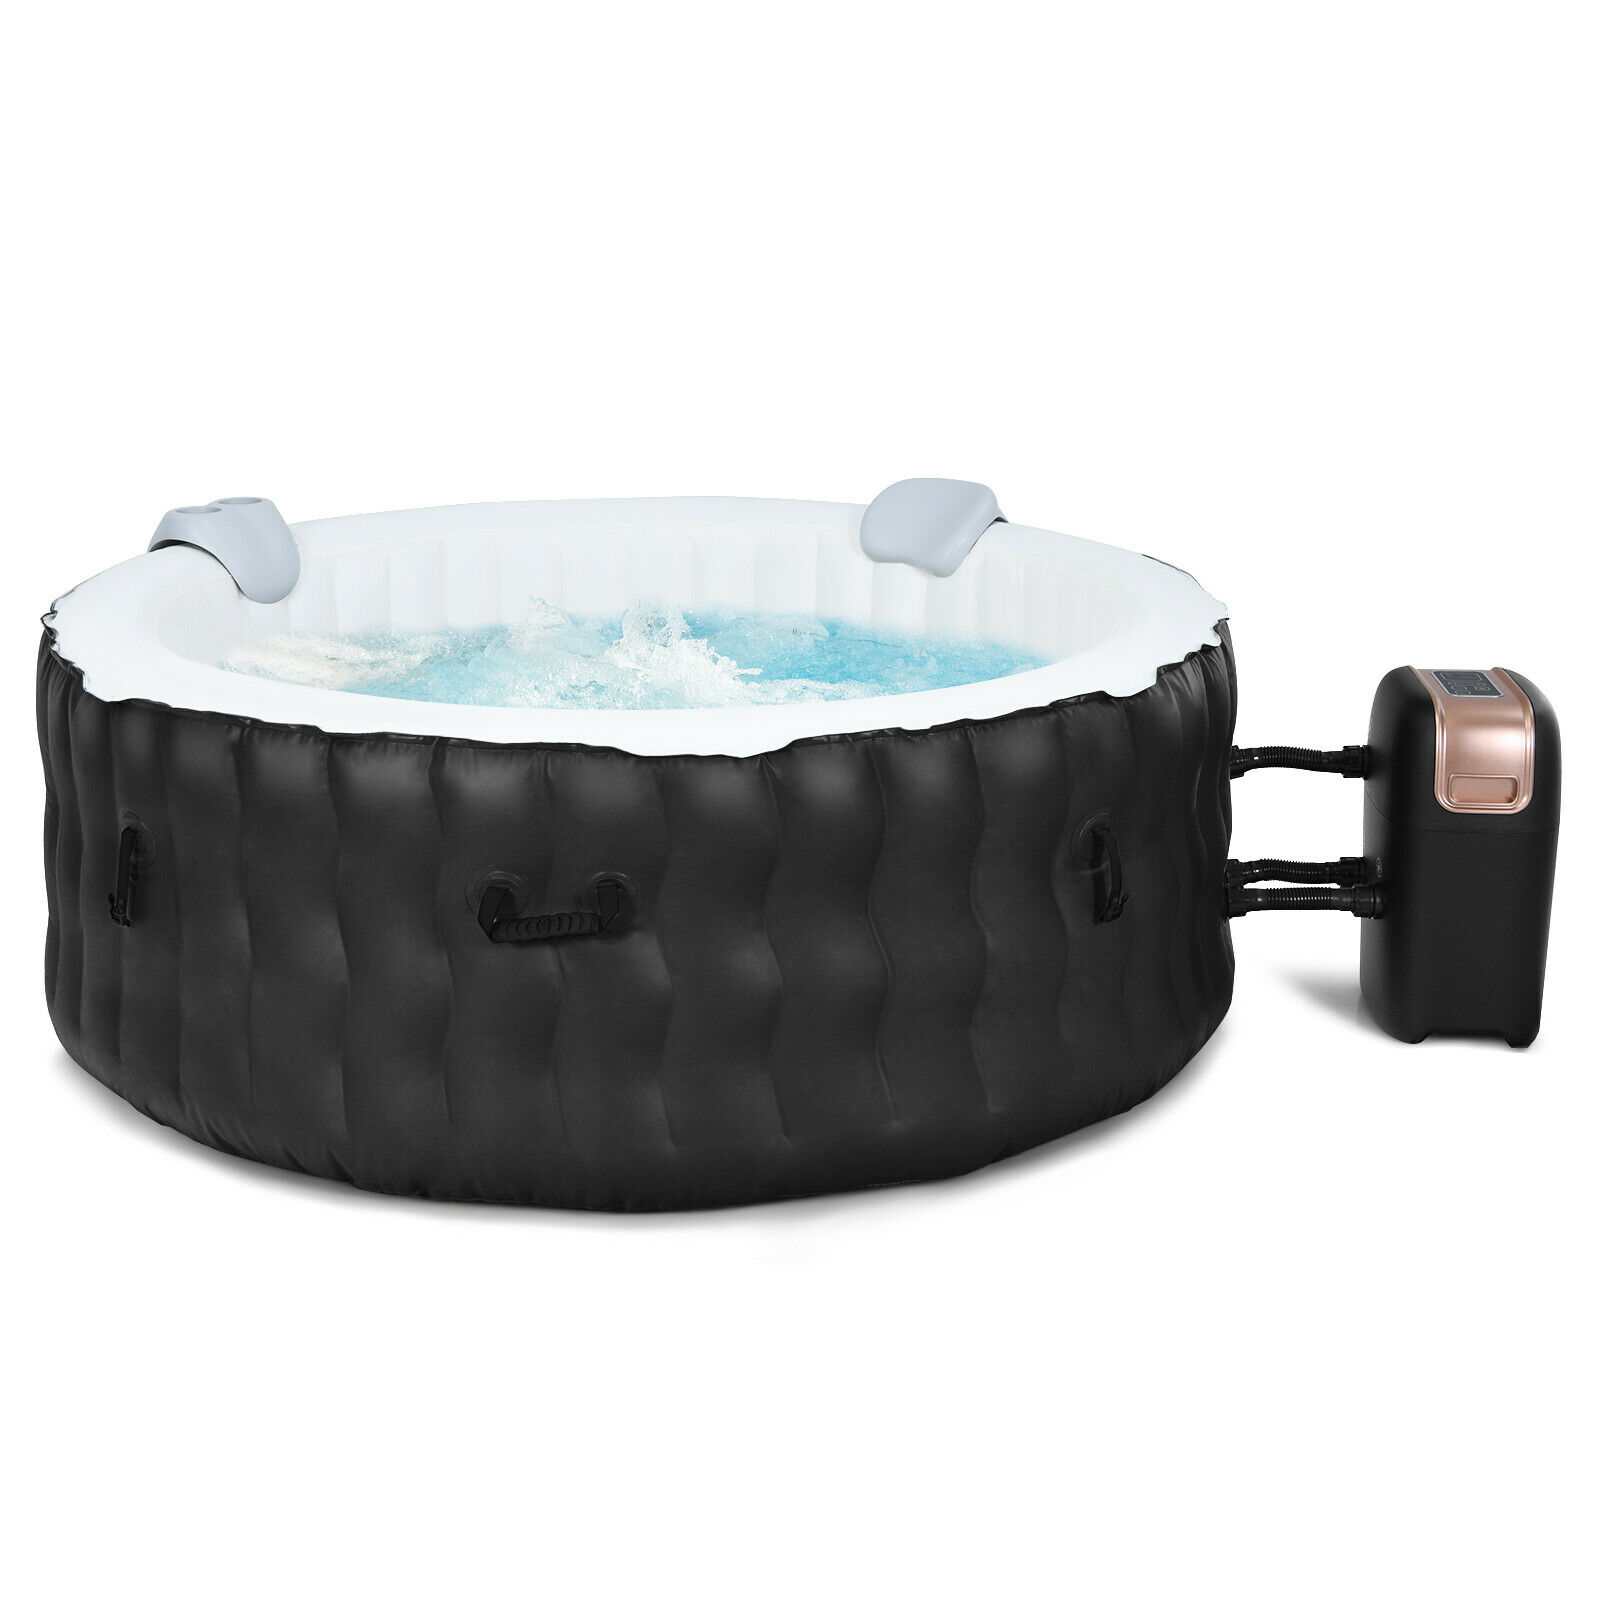 Inflatable Hot Tub with 108 Massage Bubble Jets and Headrest-Black